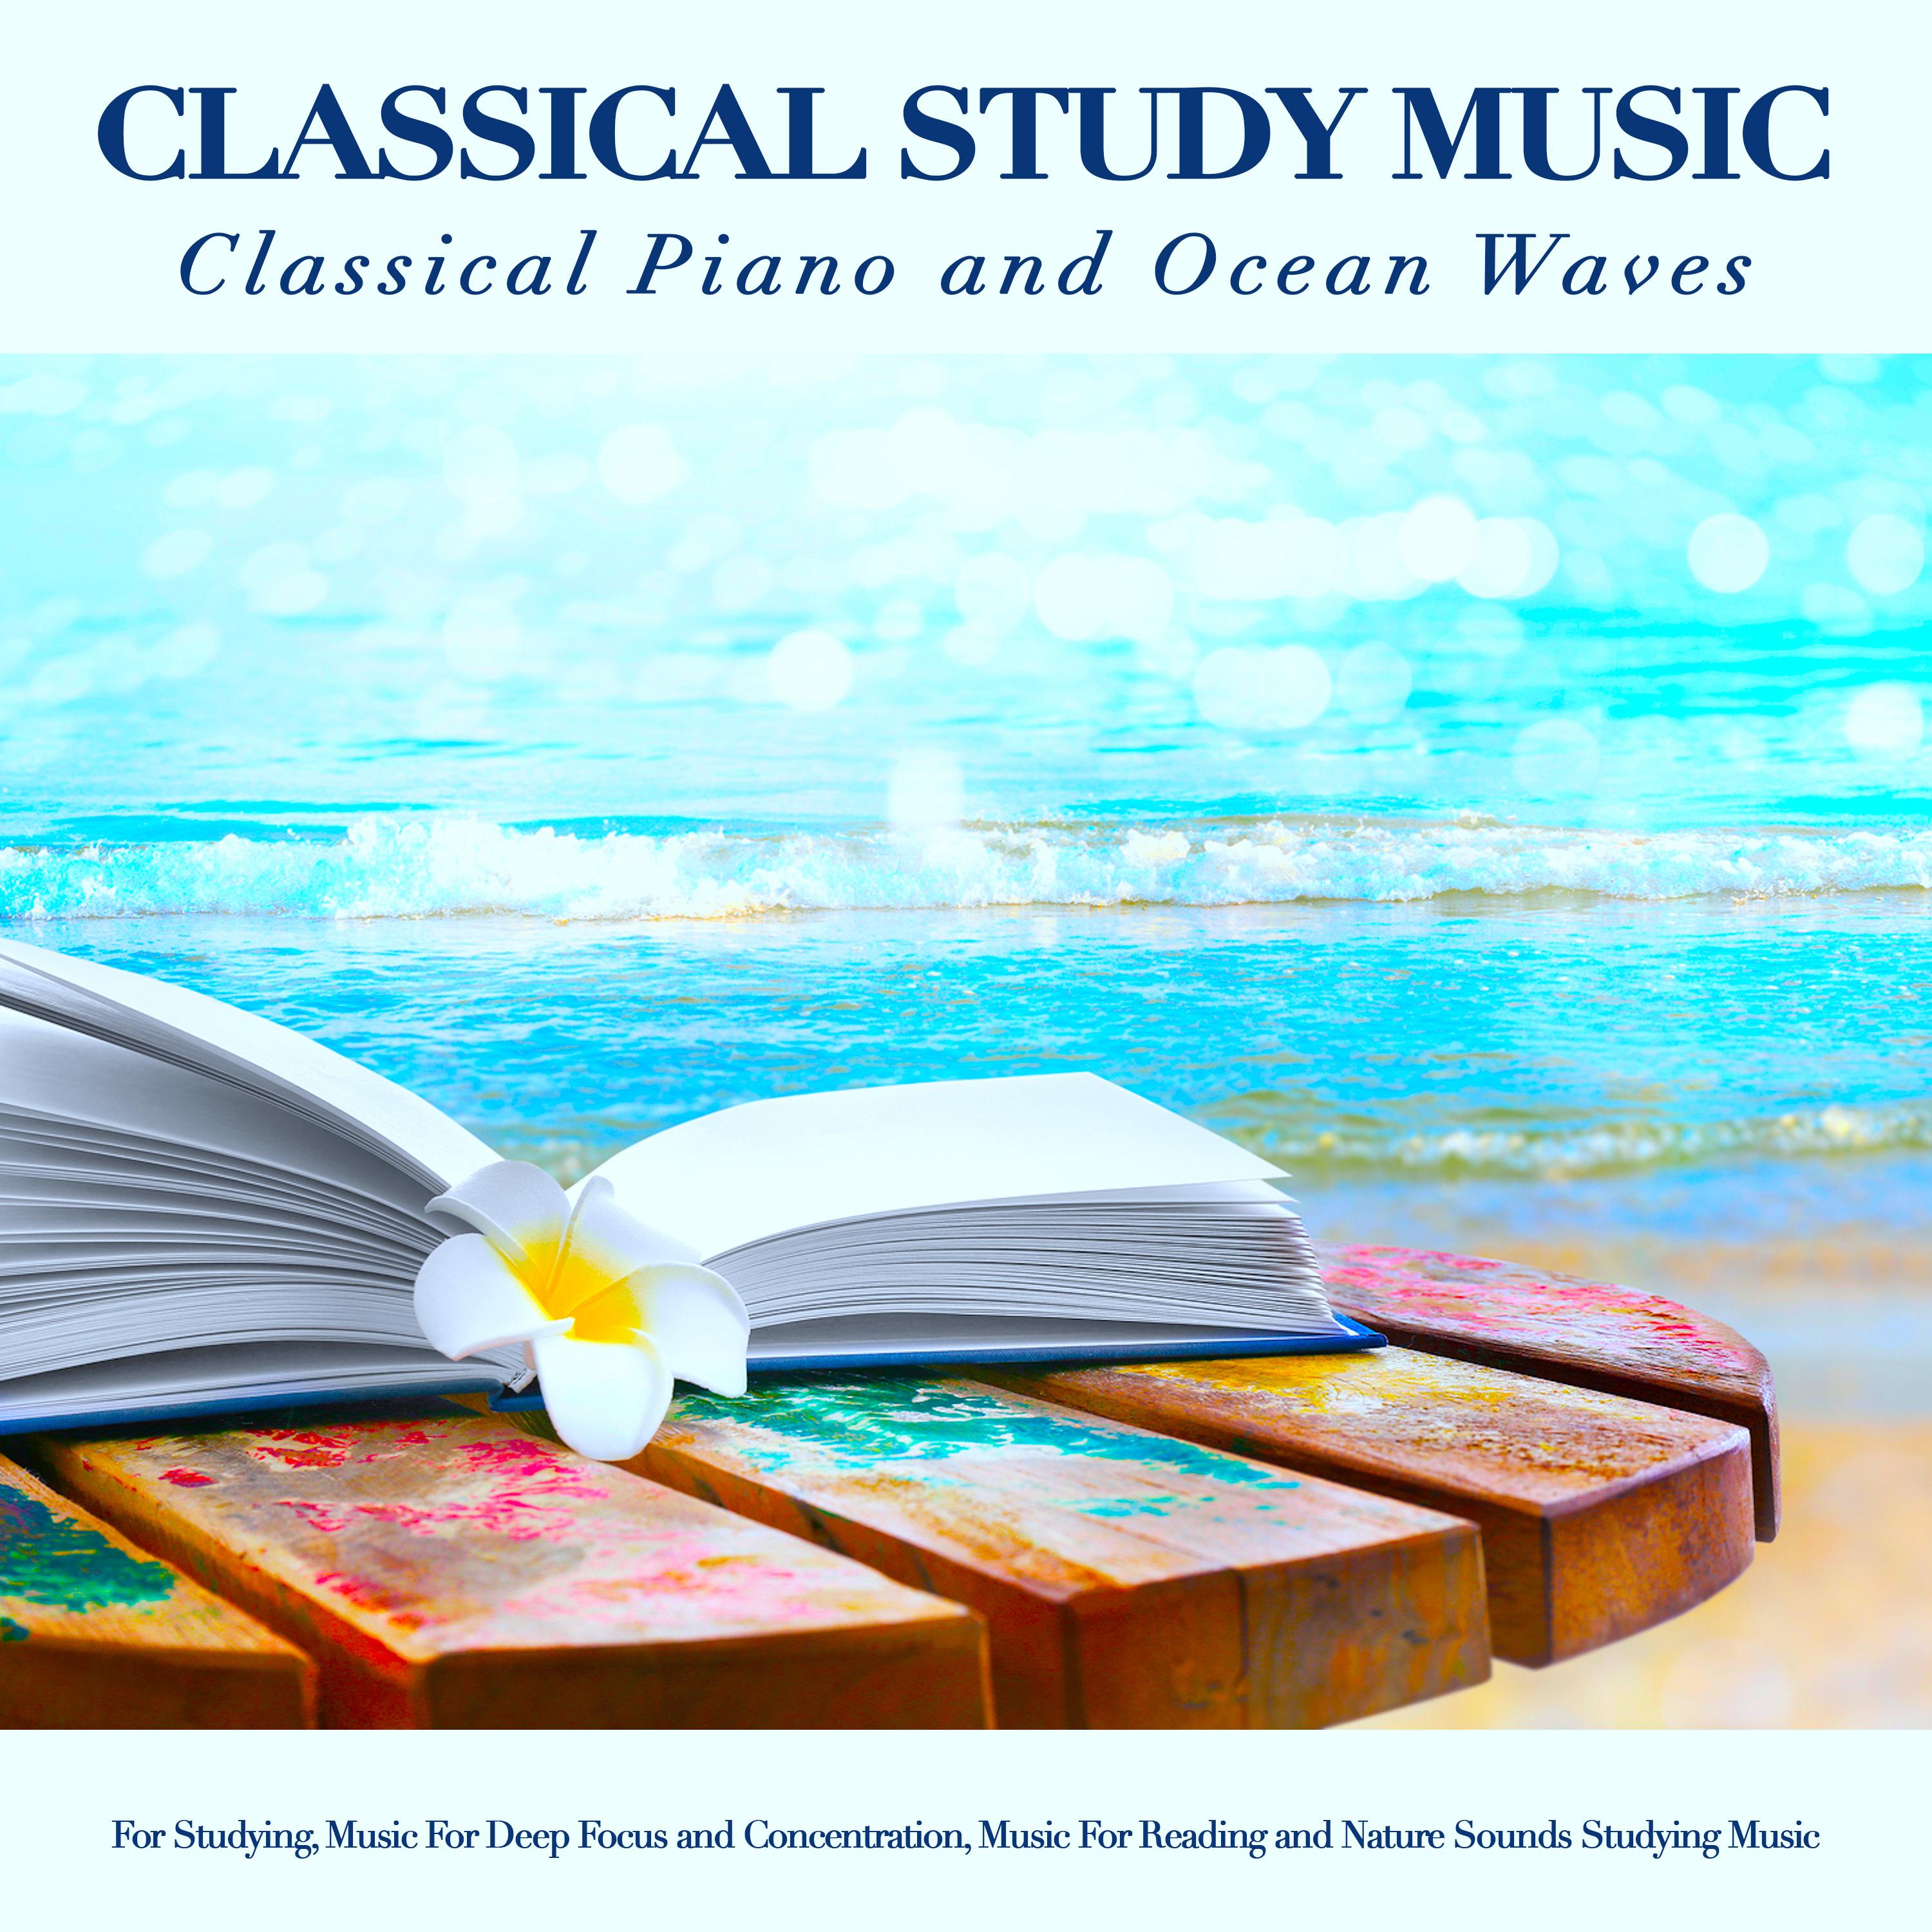 Klaviersonate KV-545 - Classical Study Music - Ocean Waves Sounds - Classical Piano for Studying